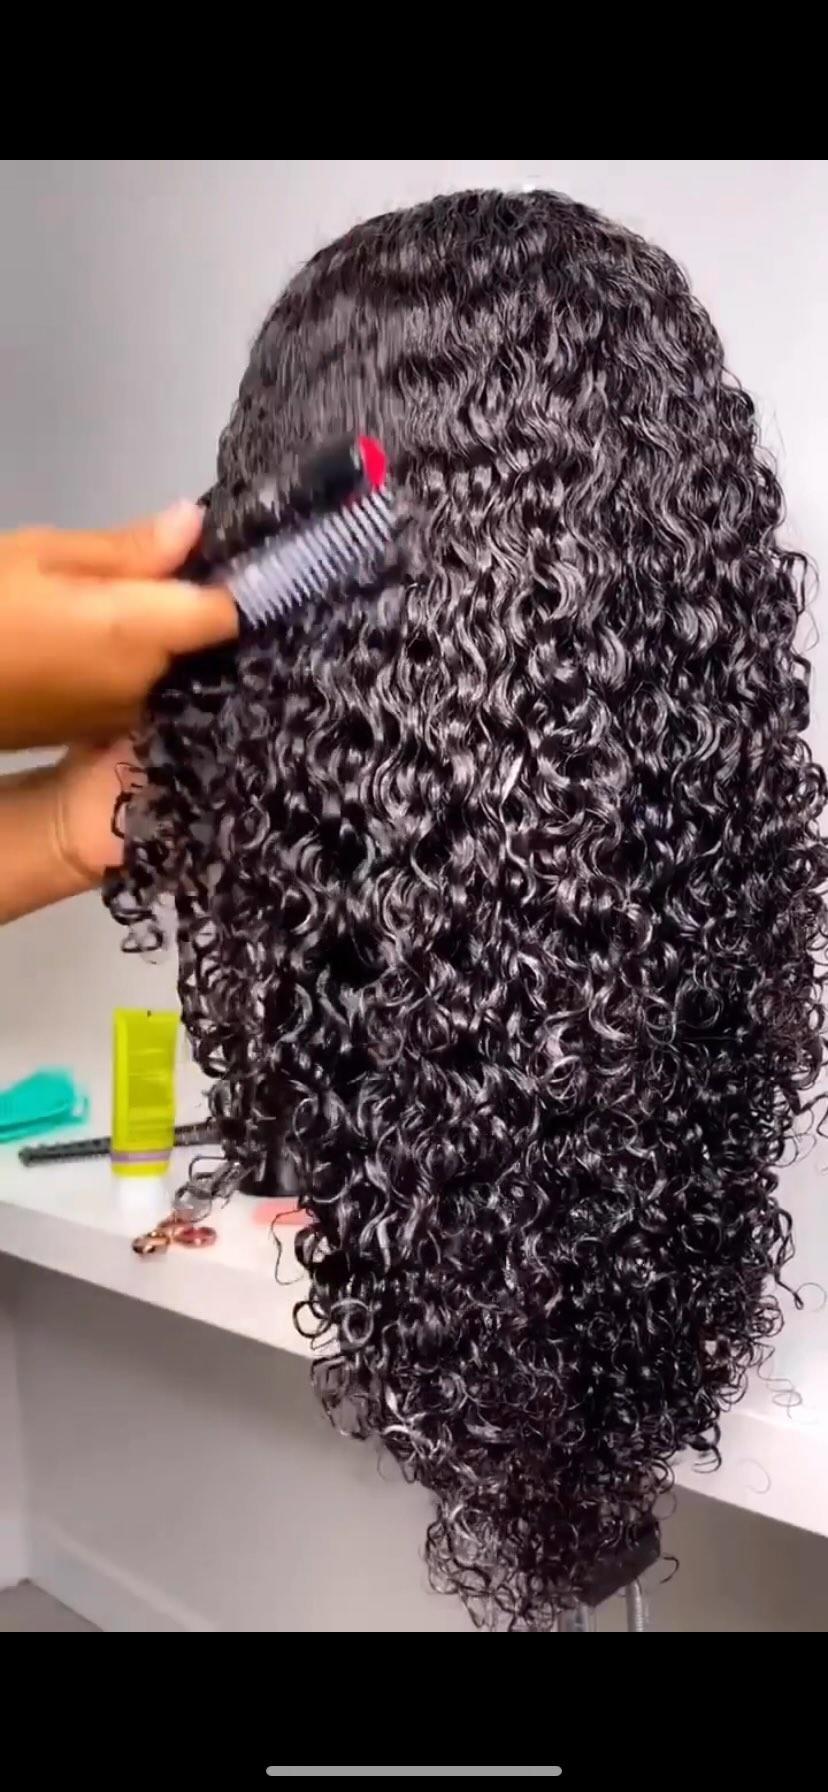 class="content__text"
 Bombbb~ Curly Hair~~
Definitely my choice😍😍
Hair details: curly 13*4 hd lace wig
Click my bio or dm for the link.
.
.
. #westkissbogosale #westkissfreewig #curlyhair #westkissblackfriday #blackfridaywigsale #blackfridaygiveaway #westkisswig #curlyhair #wiglife #hair #highlightwigs #laceclosurewig #hairsalon #laceclosureinstall #lacewig #wigmaker #wigsforsale #westkiss #protectivestyles #laceclosures #laceclosure #virginhair #healthyhair #hairgoals #closure #hairstyle #hairstylist #blackgirlmagic #hairextensions #laceclosuresewin 
 